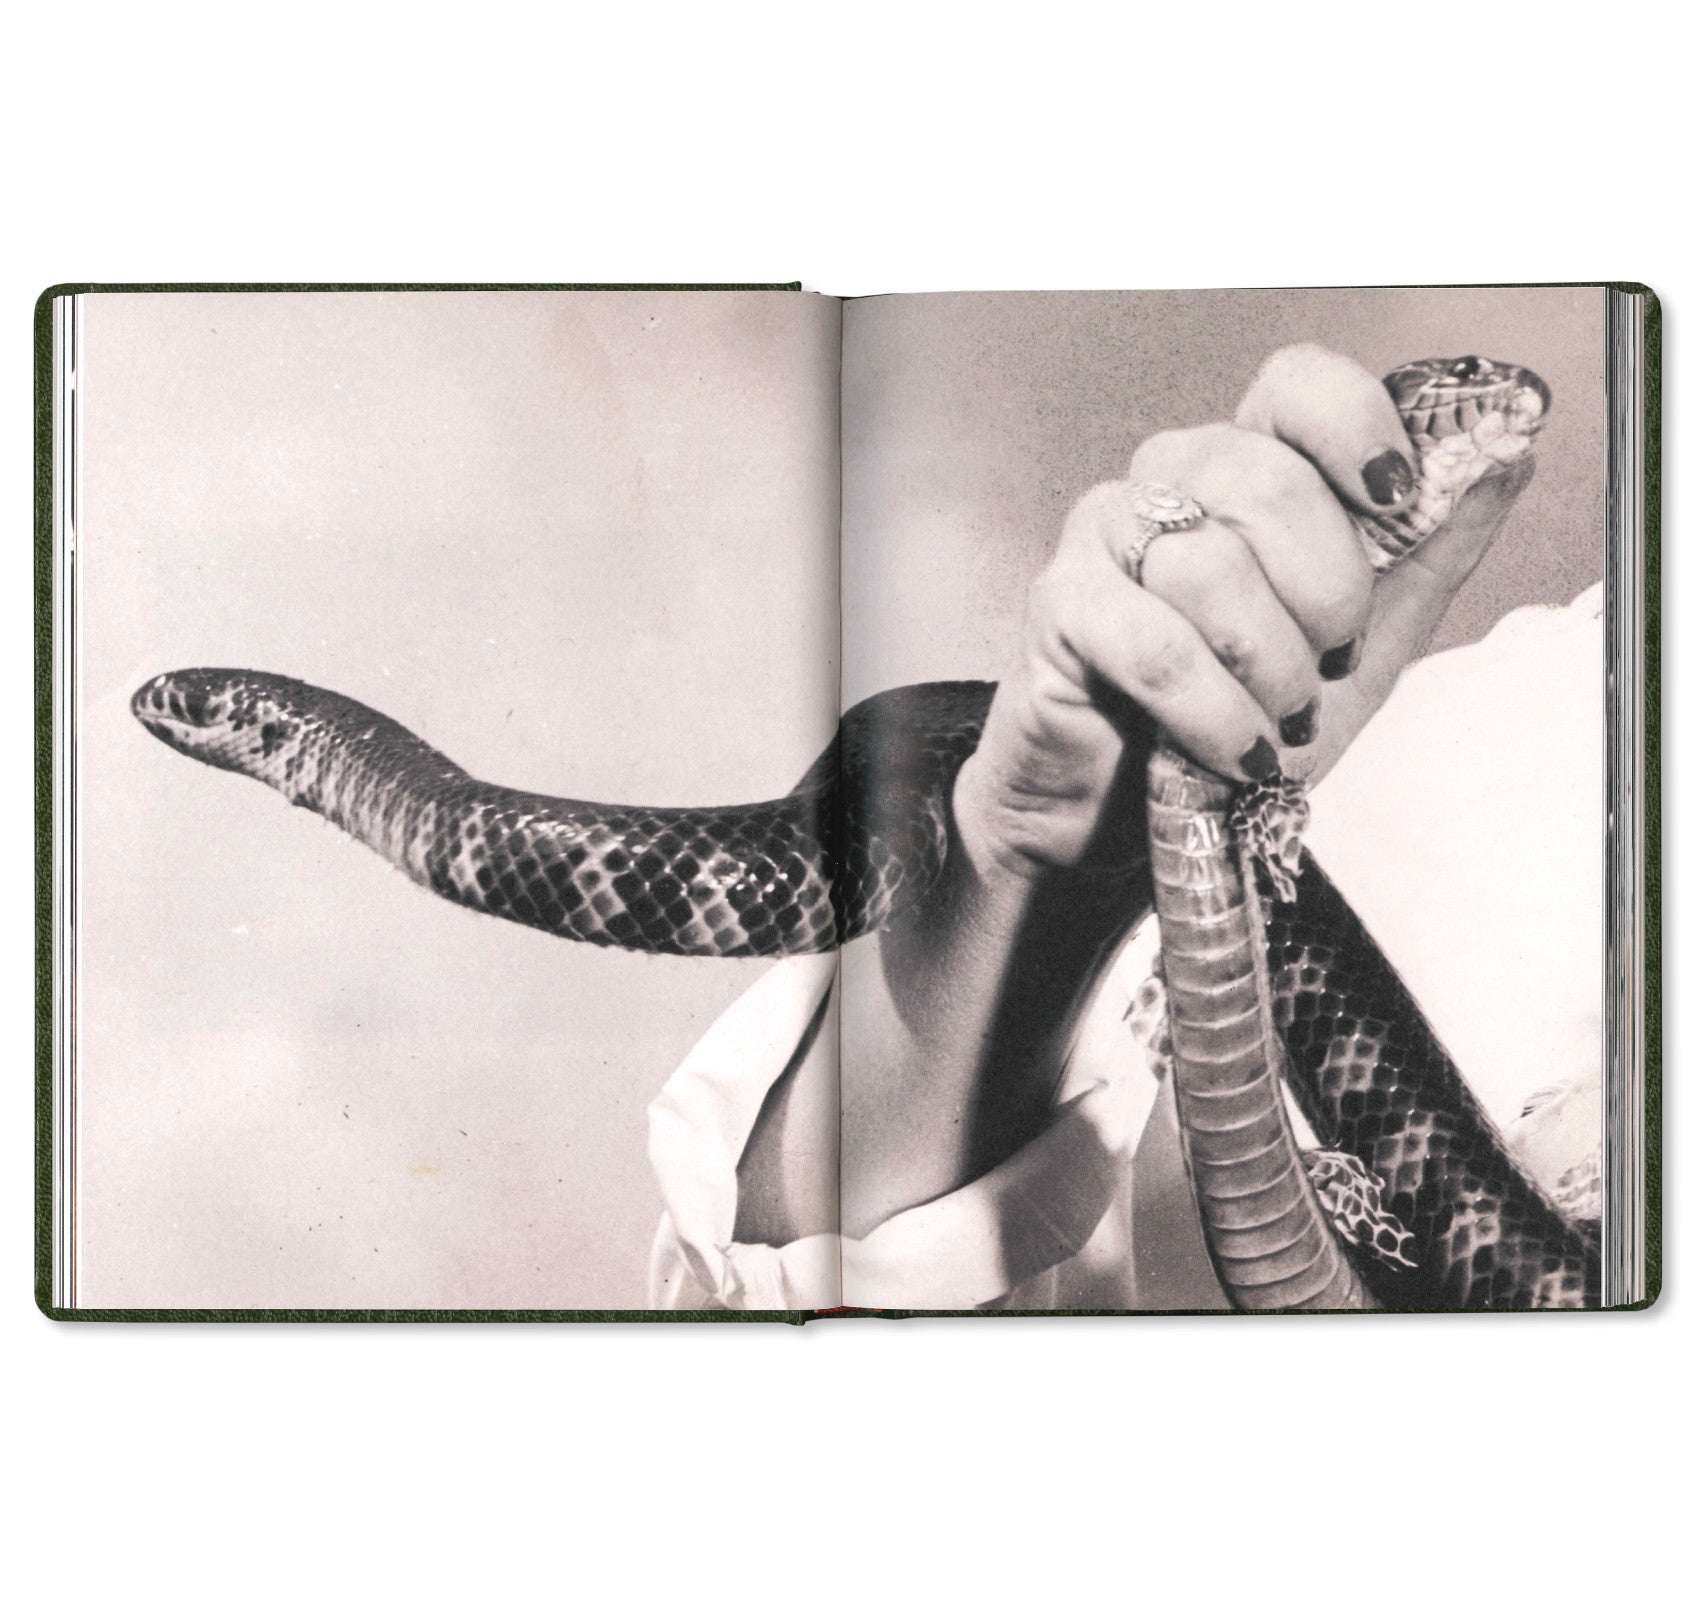 GIRL PLAYS WITH SNAKE by Clare Strand